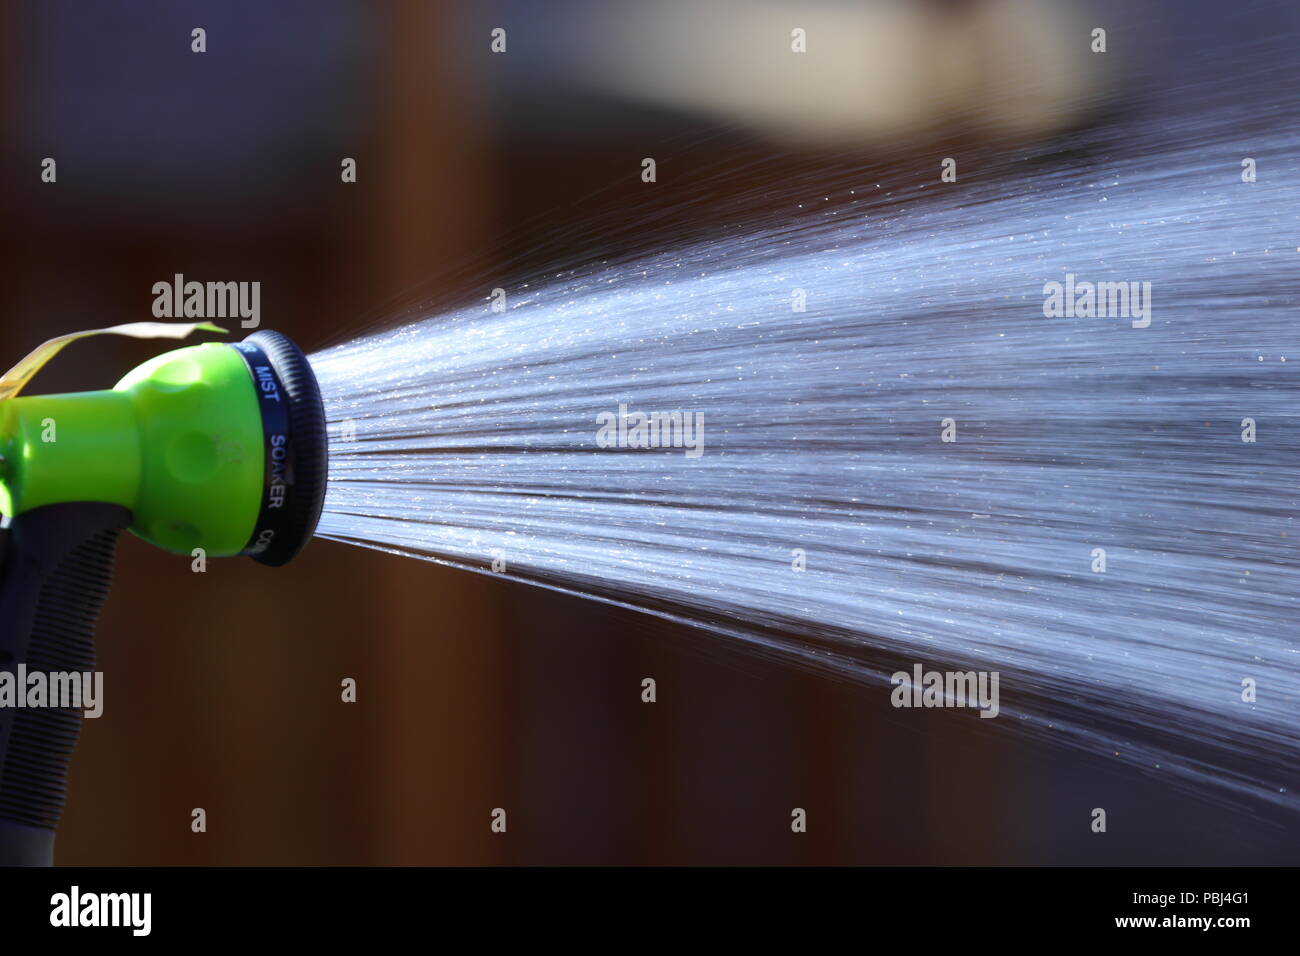 A shower of water from a hosepipe before the proposed hosepipe ban comes into effect. Stock Photo